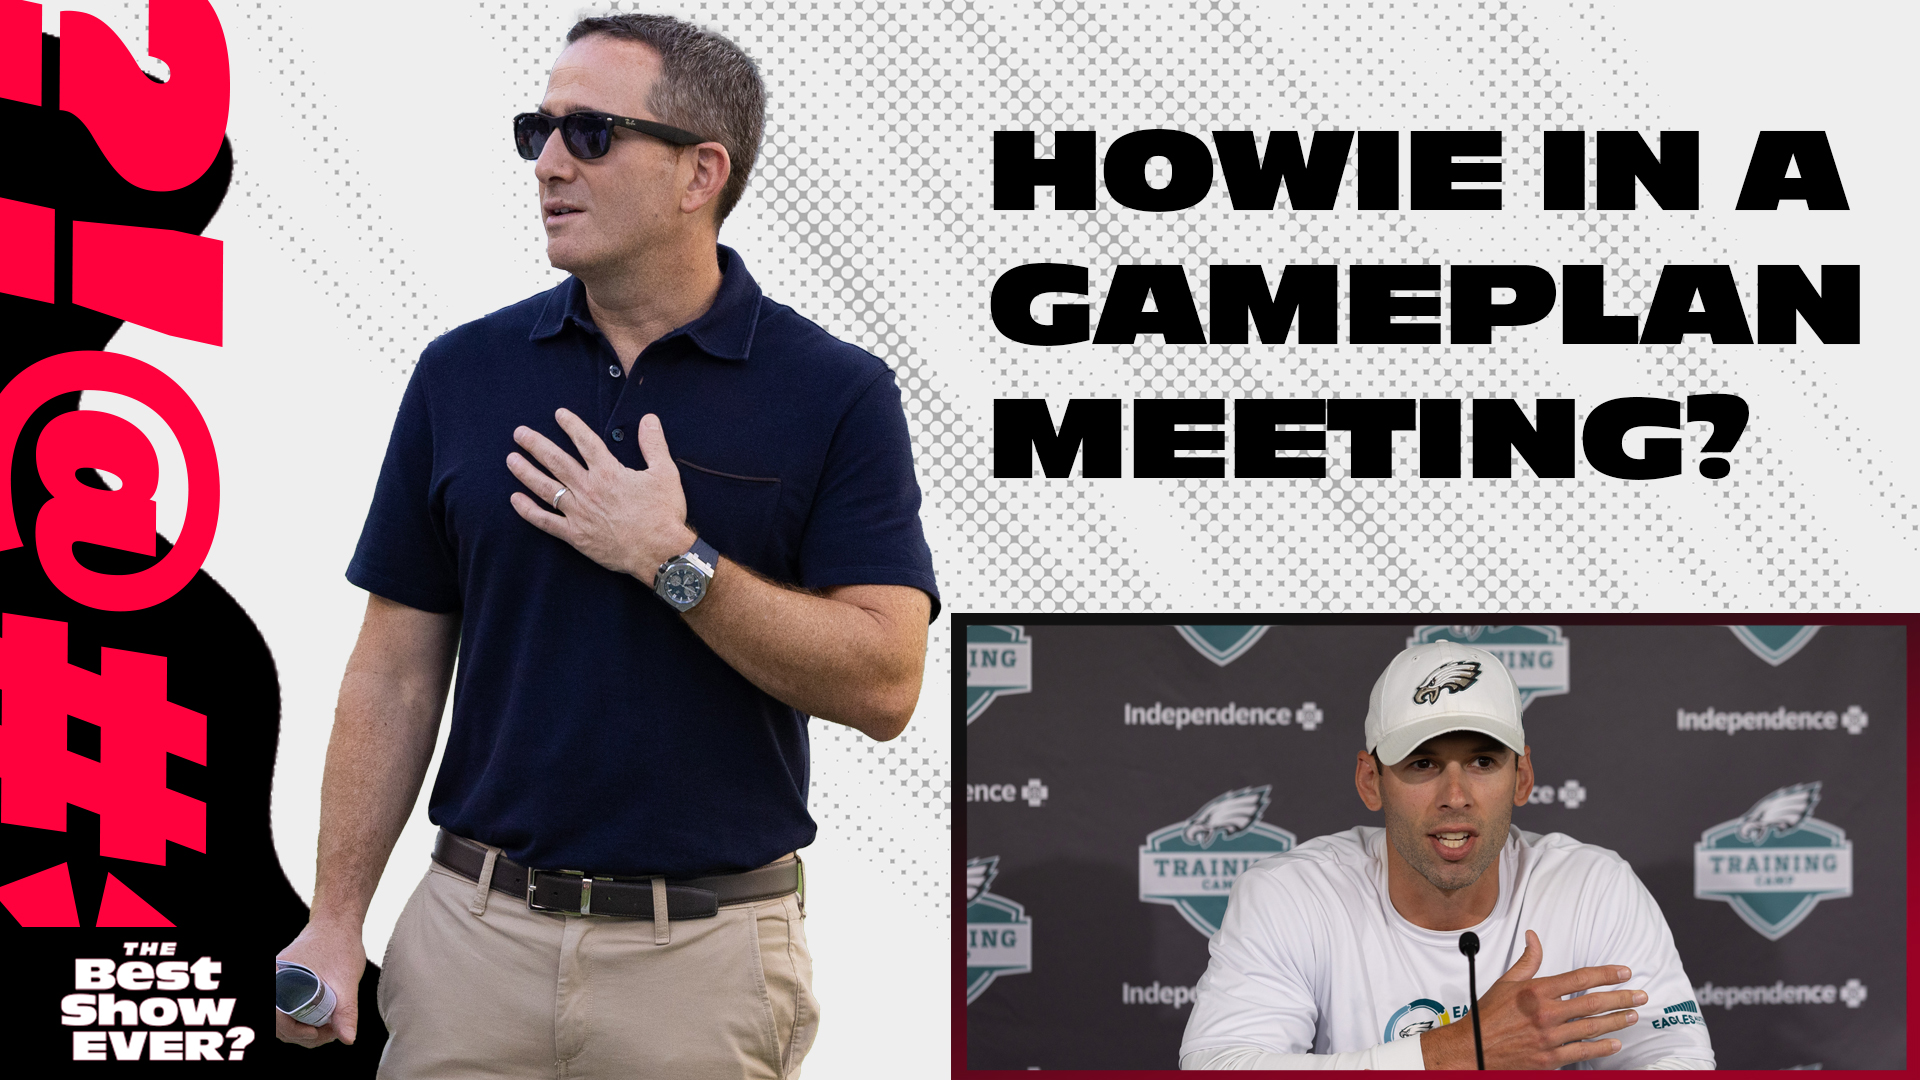 Best Show Ever?: The legitimate reason Howie would be in game-plan meeting  – NBC Sports Philadelphia